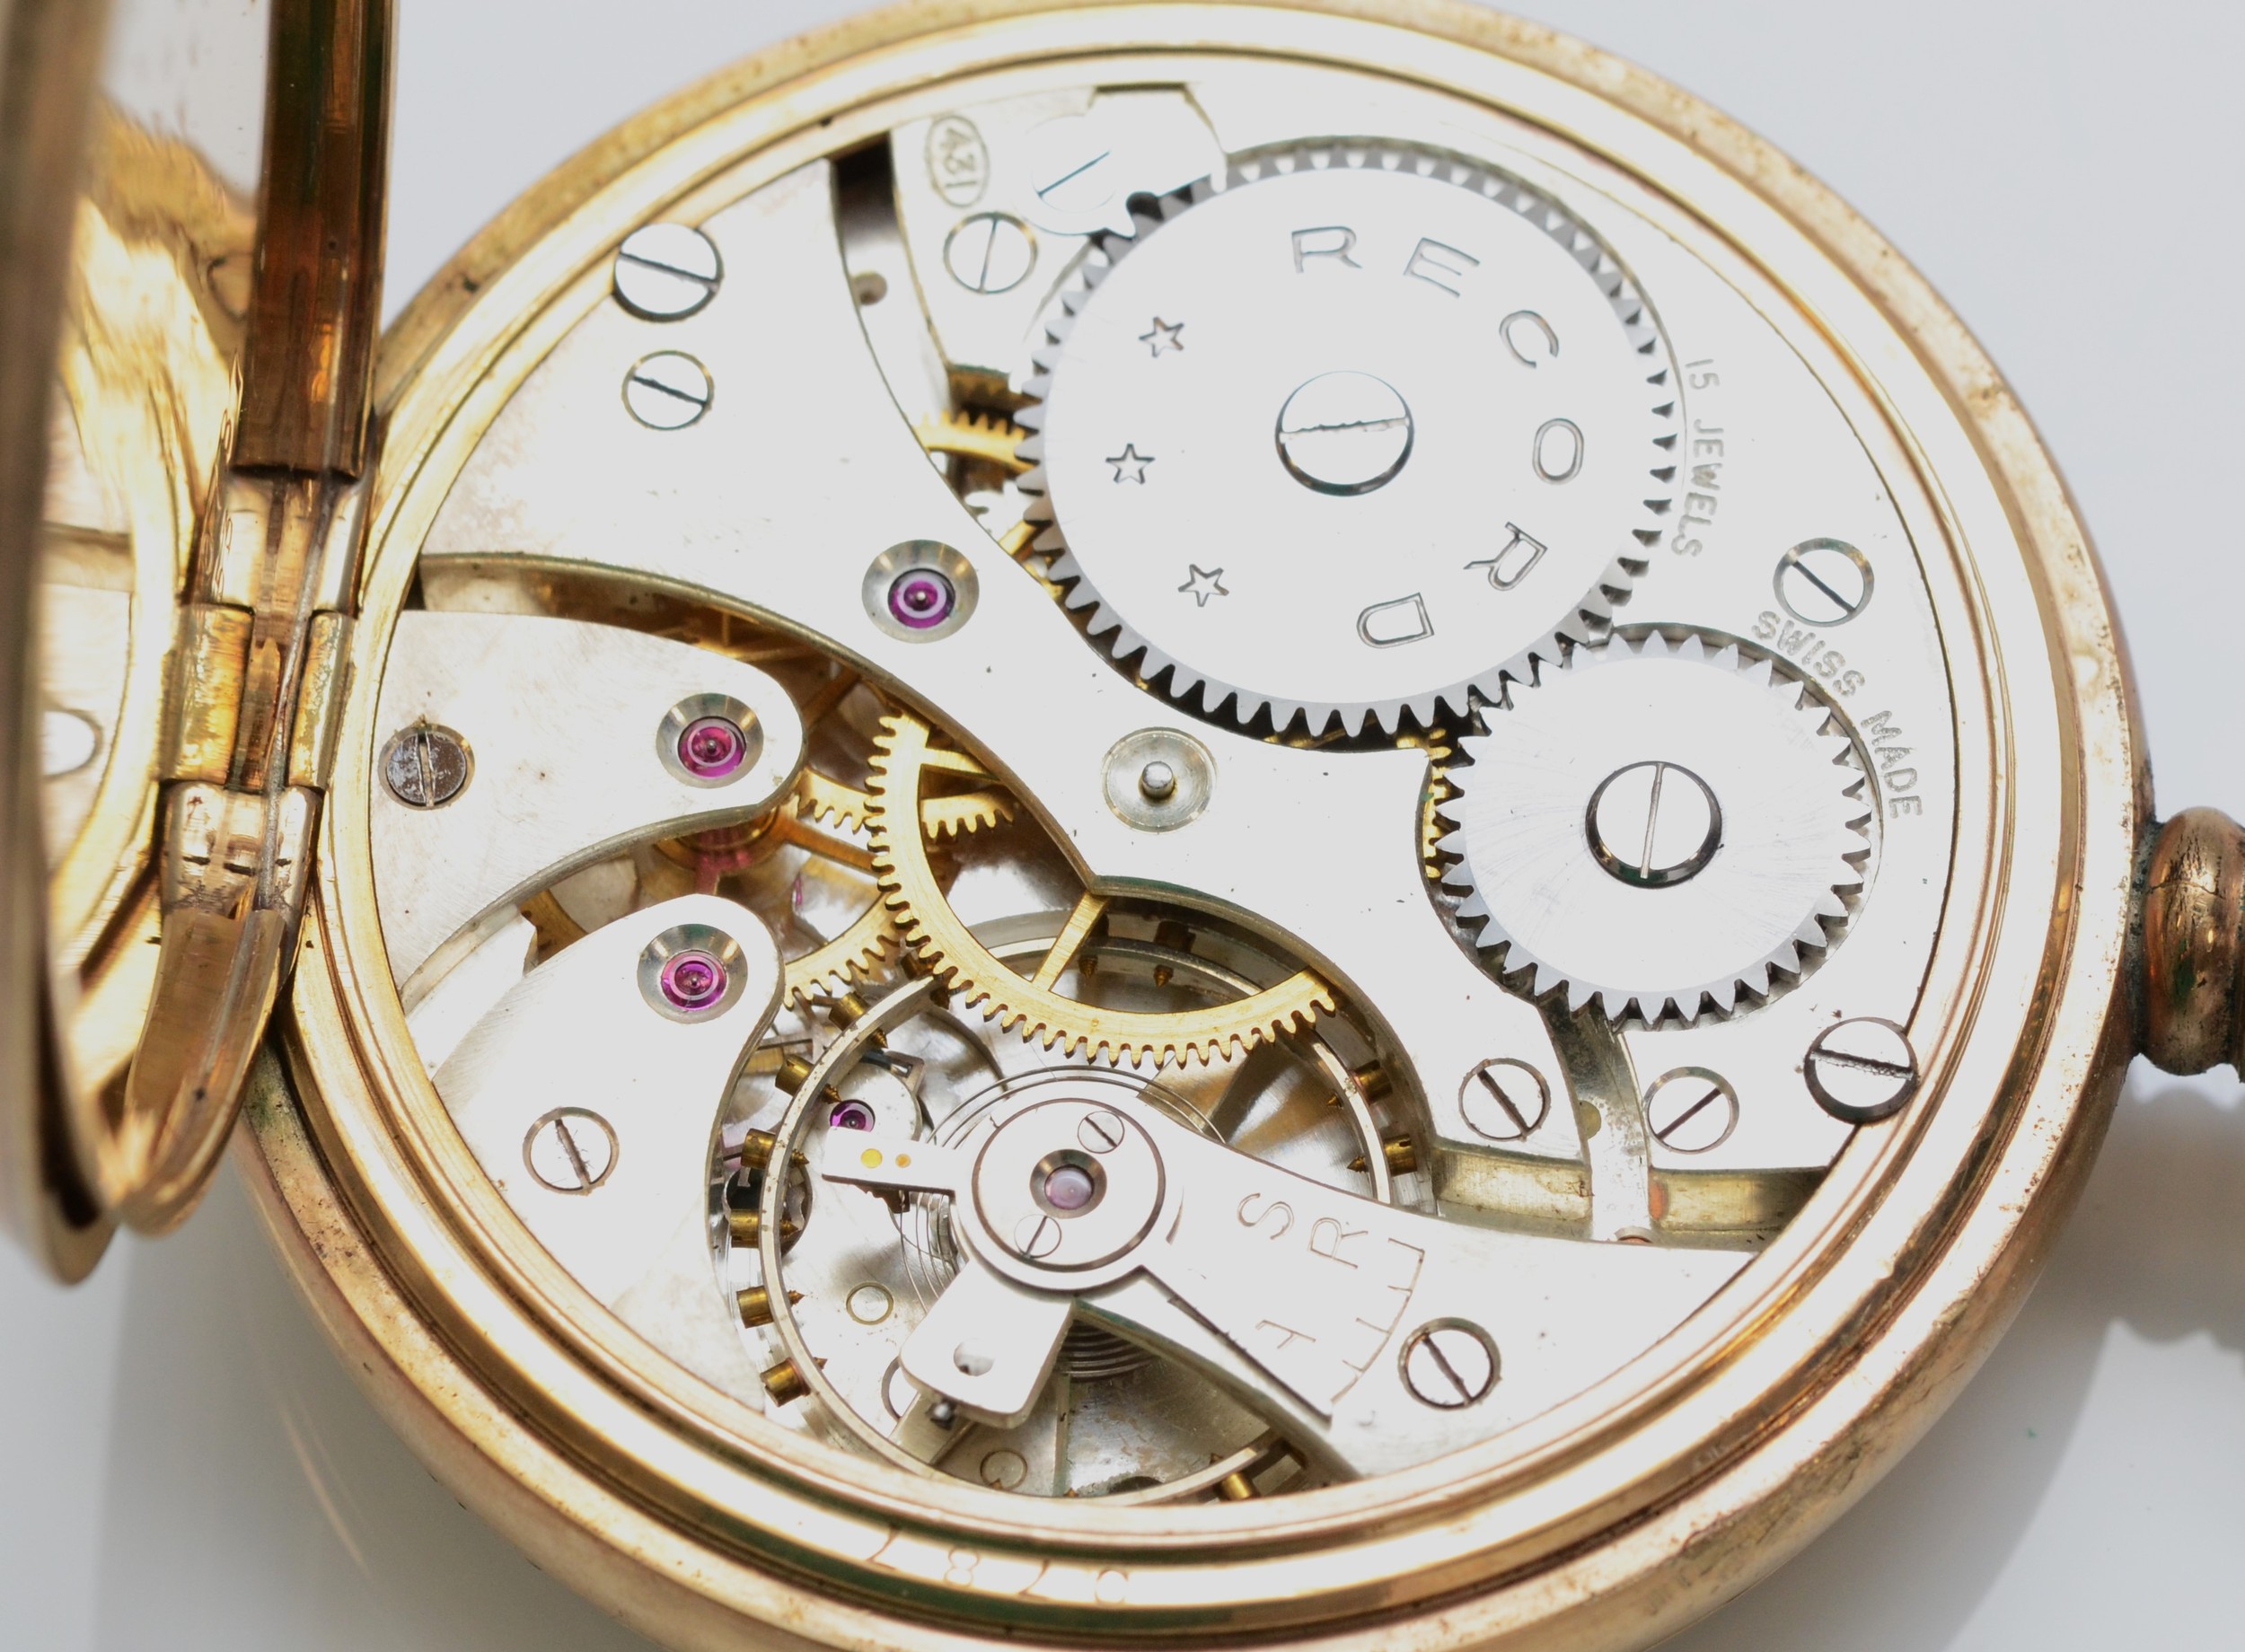 Record, a gold plated manual wind open face pocket watch, 15 jewel Swiss movement, engraved back - Image 3 of 3